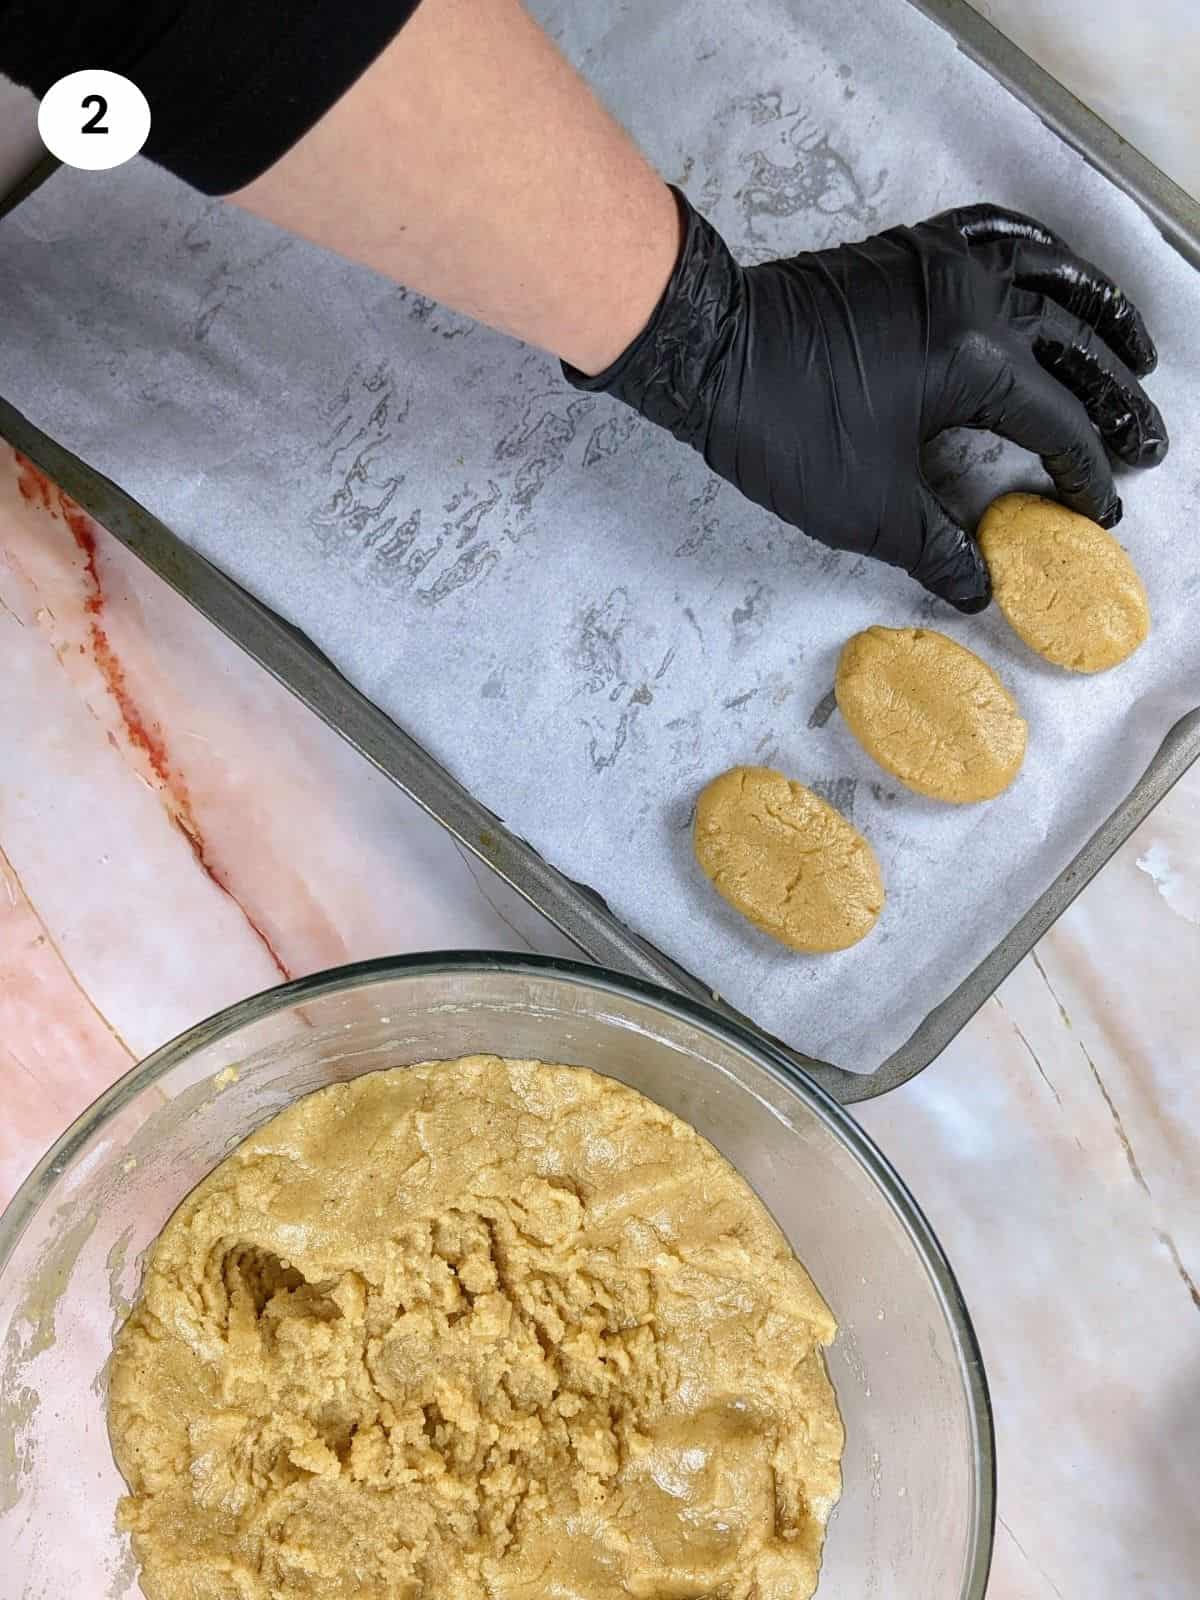 Placing the honey cookie on a lined baking tray